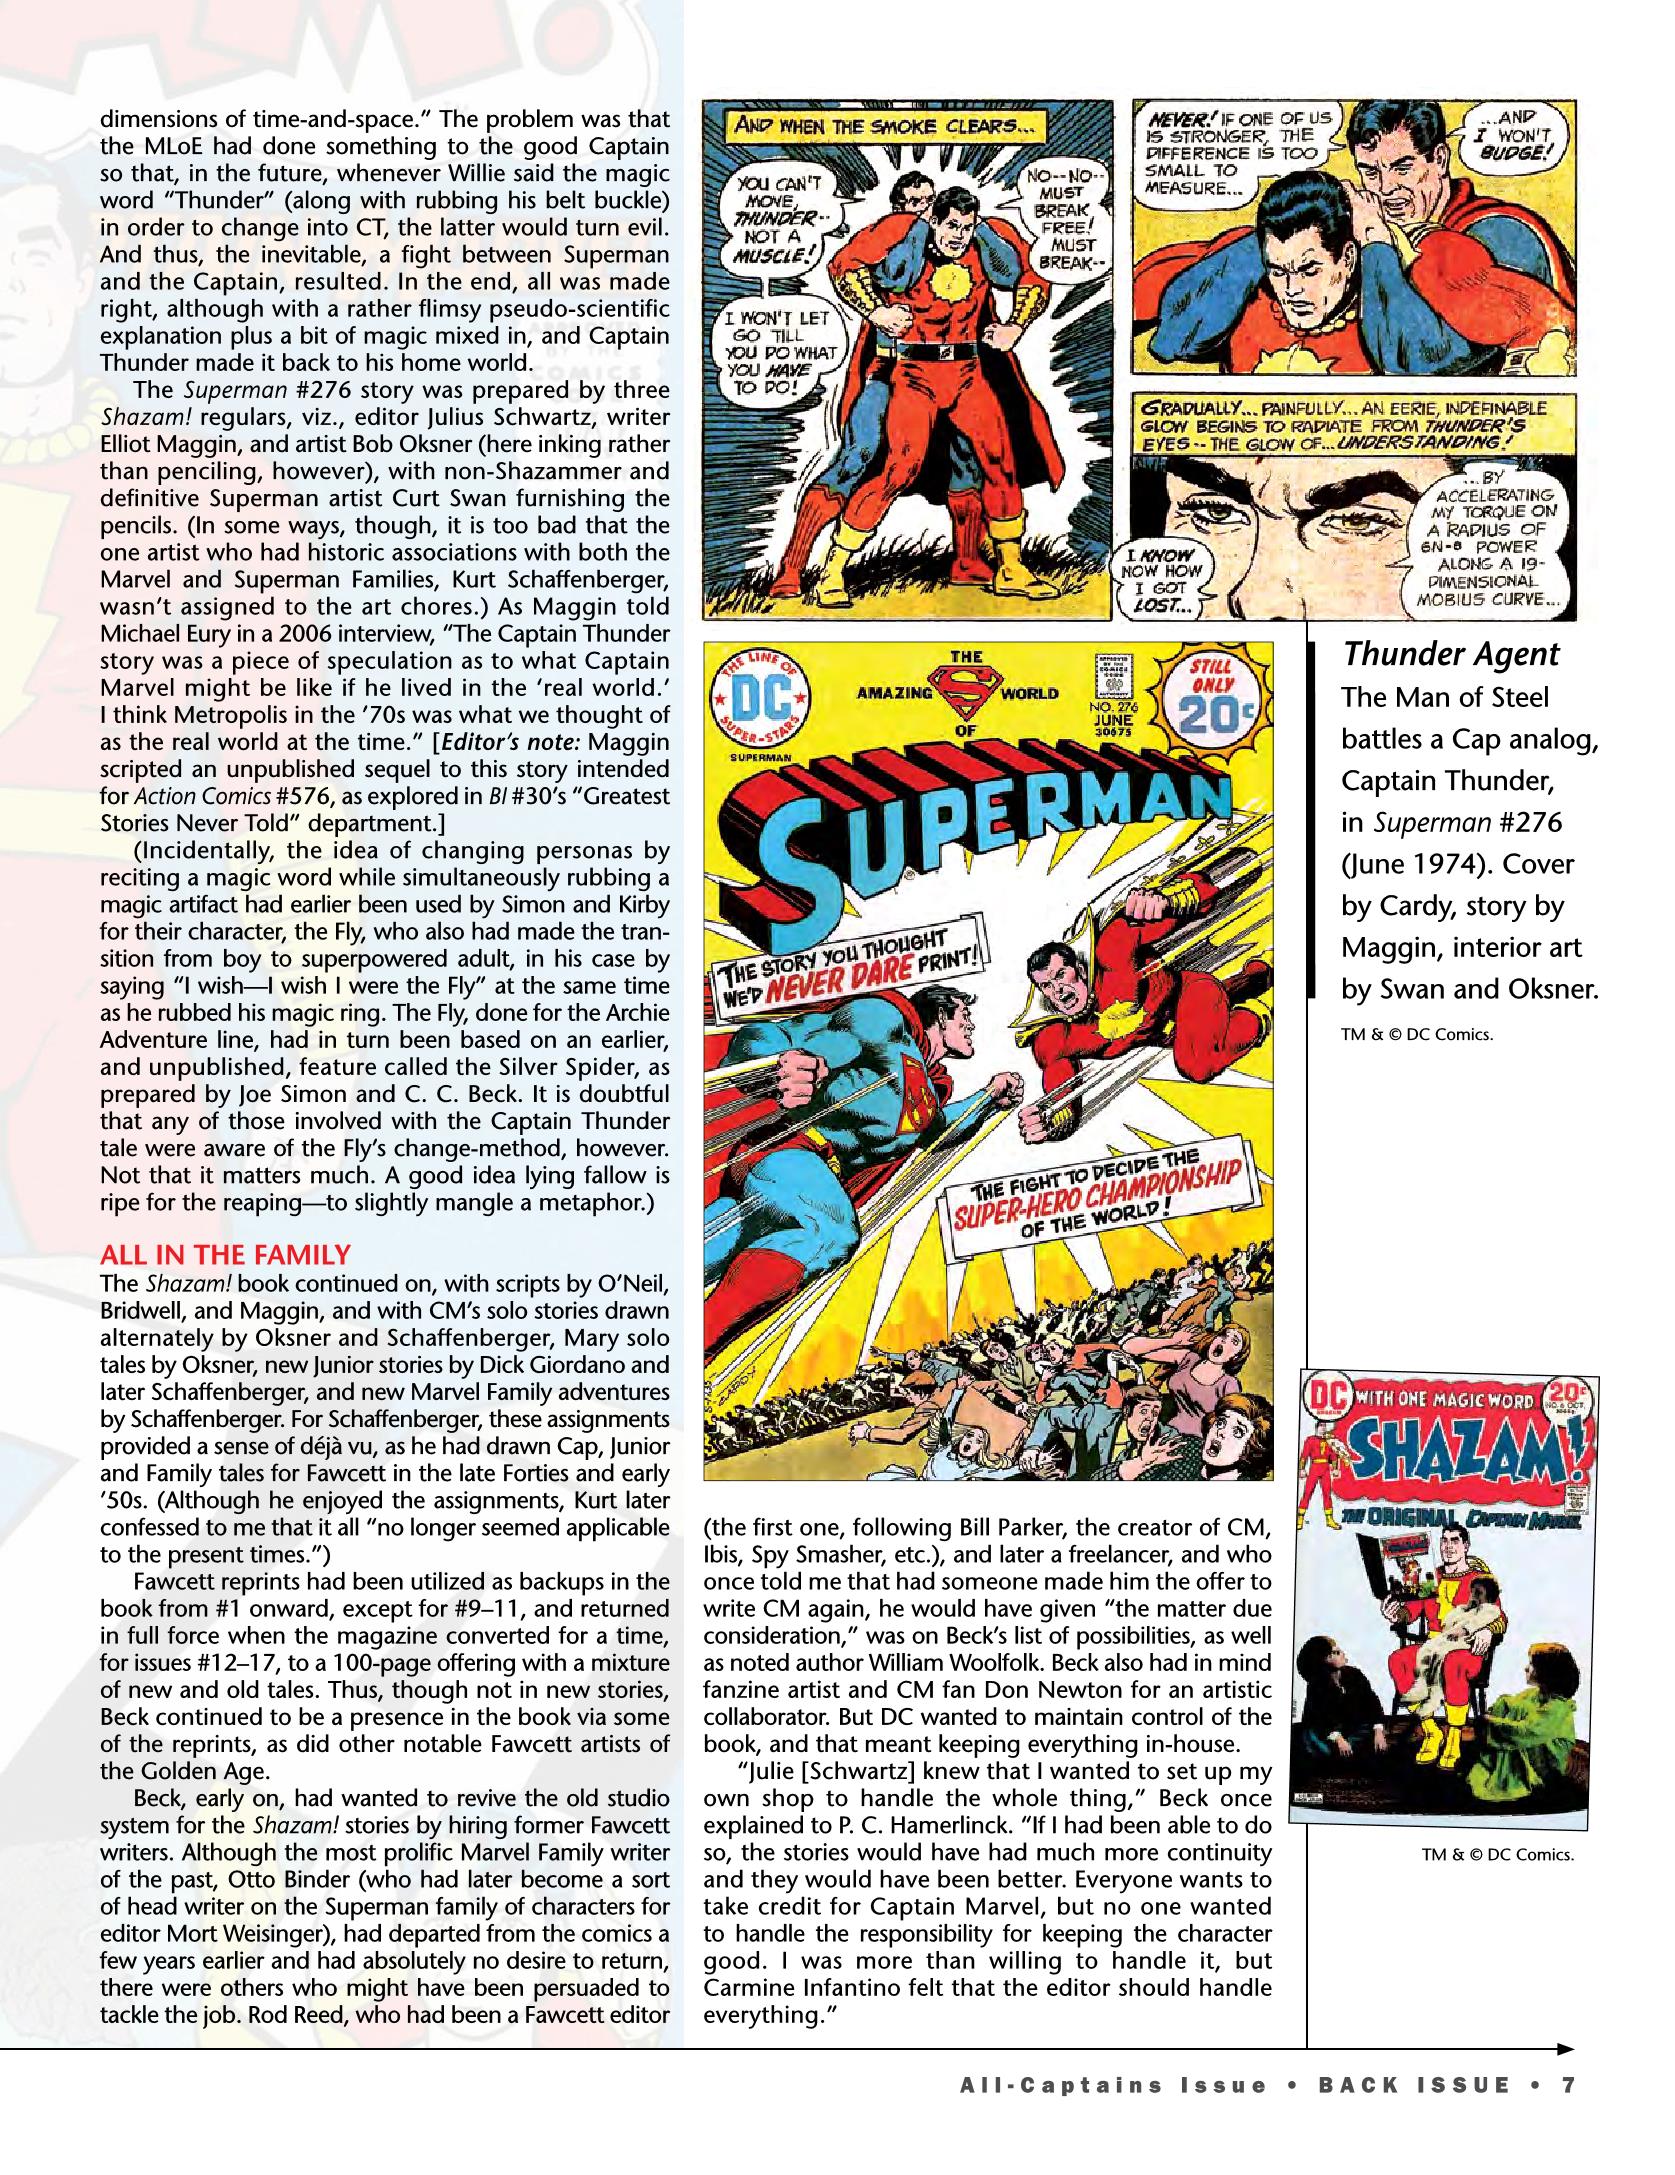 Read online Back Issue comic -  Issue #93 - 84